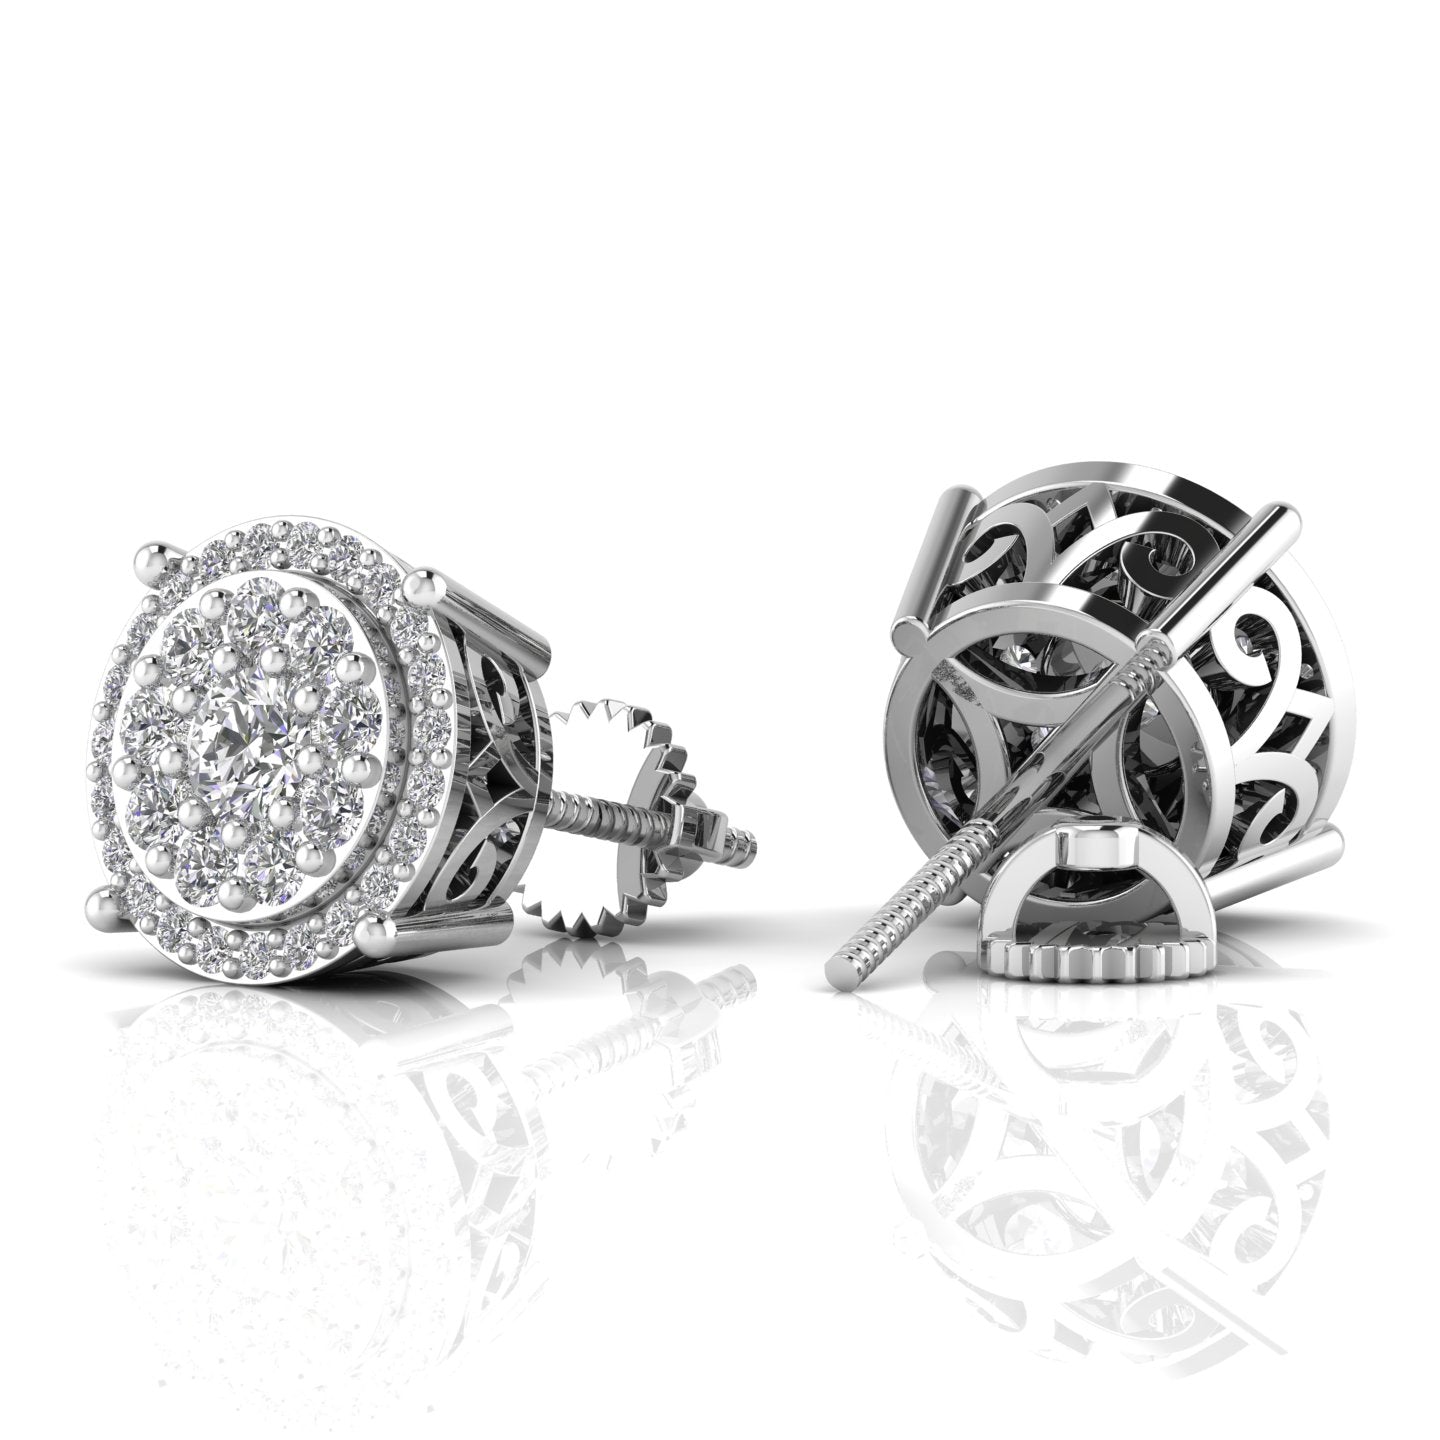 Shop Diamond Stud Earrings At Wholesale Prices